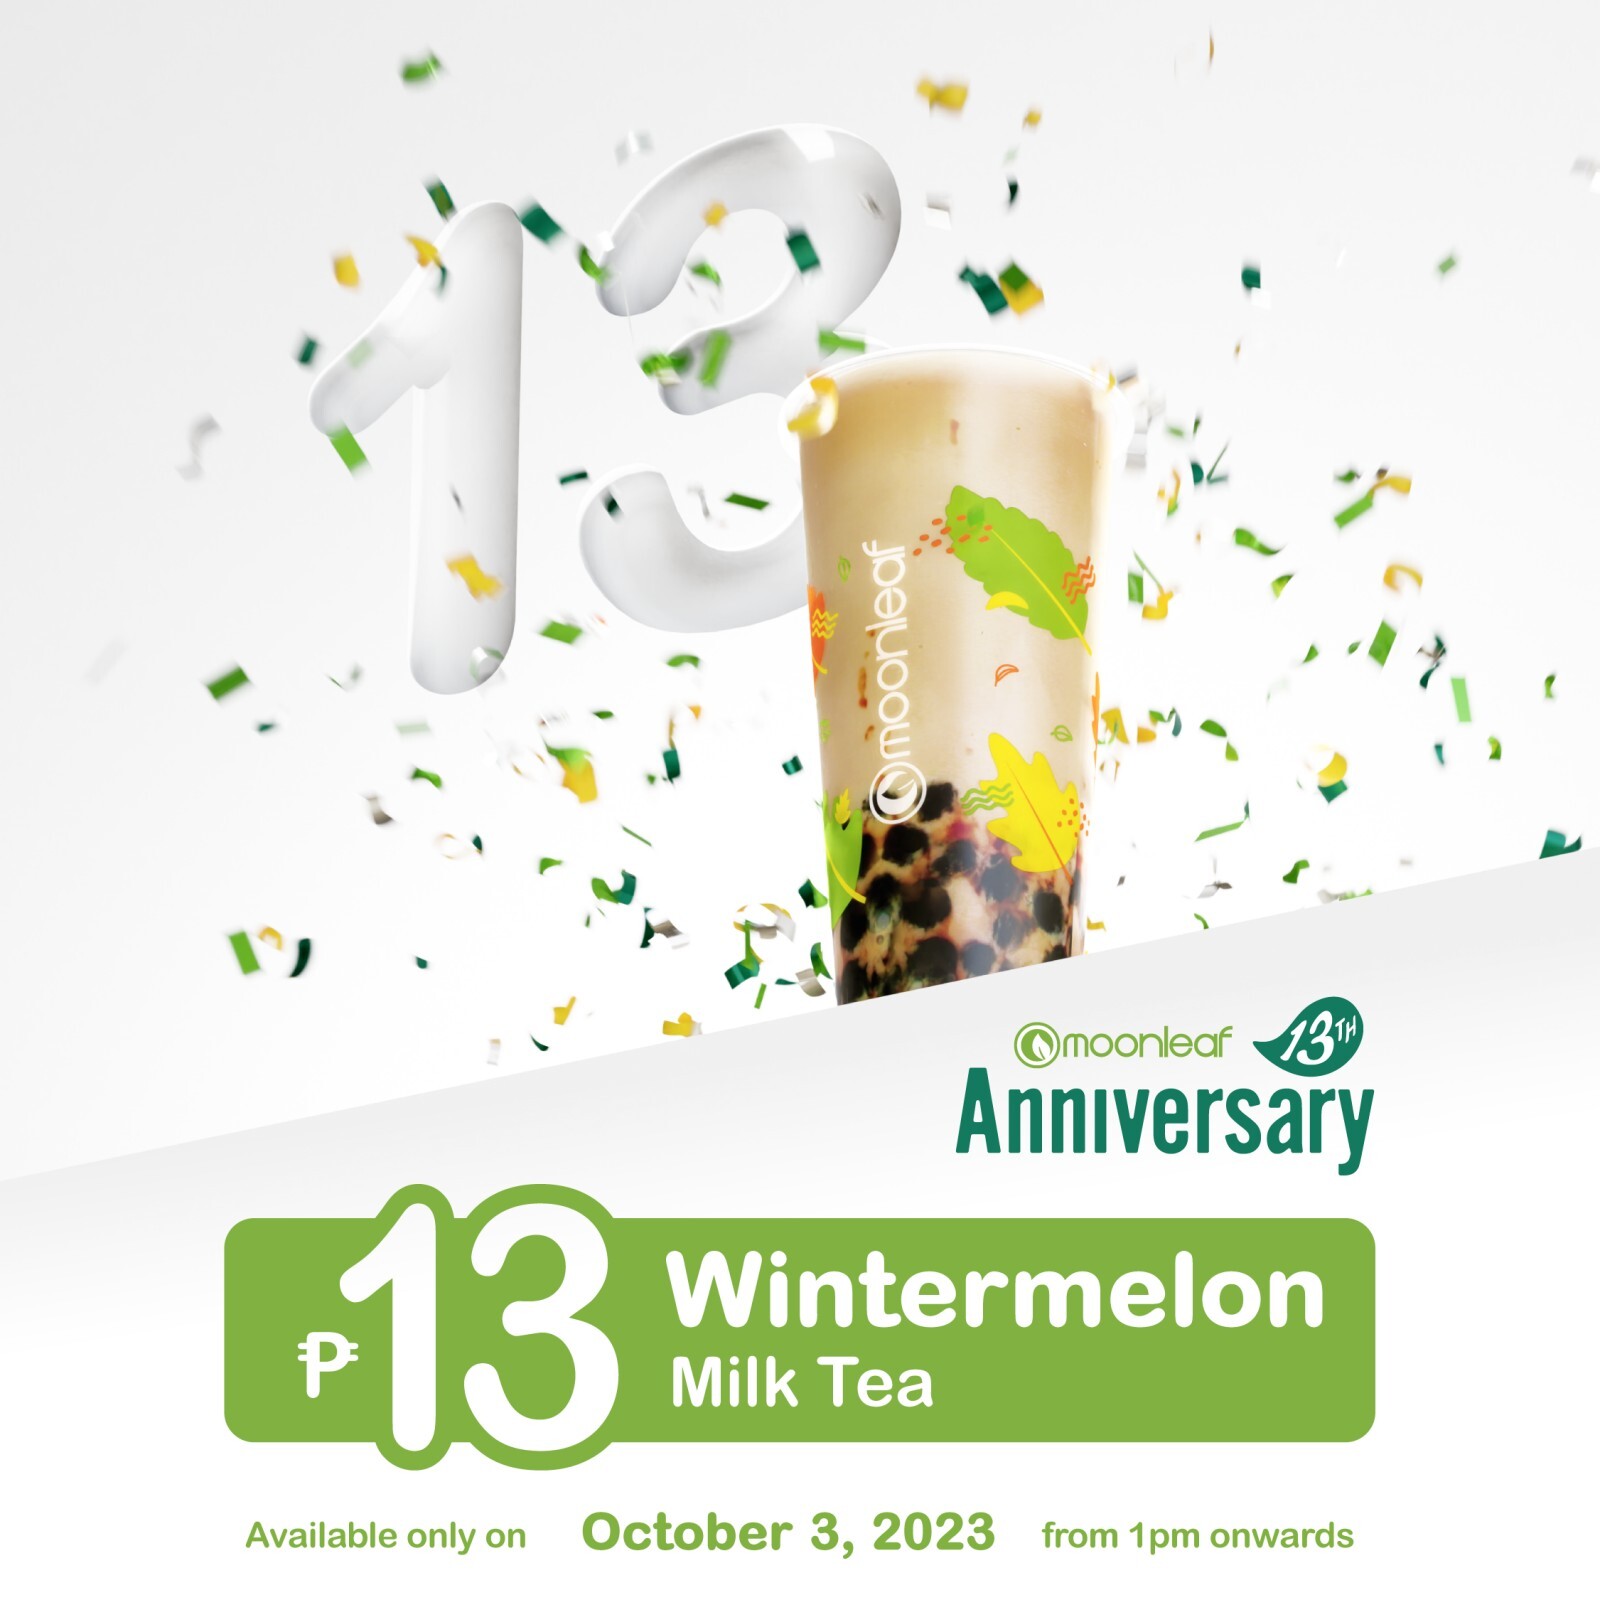 Moonleaf celebrates their 13th Anniversary with treats and deals